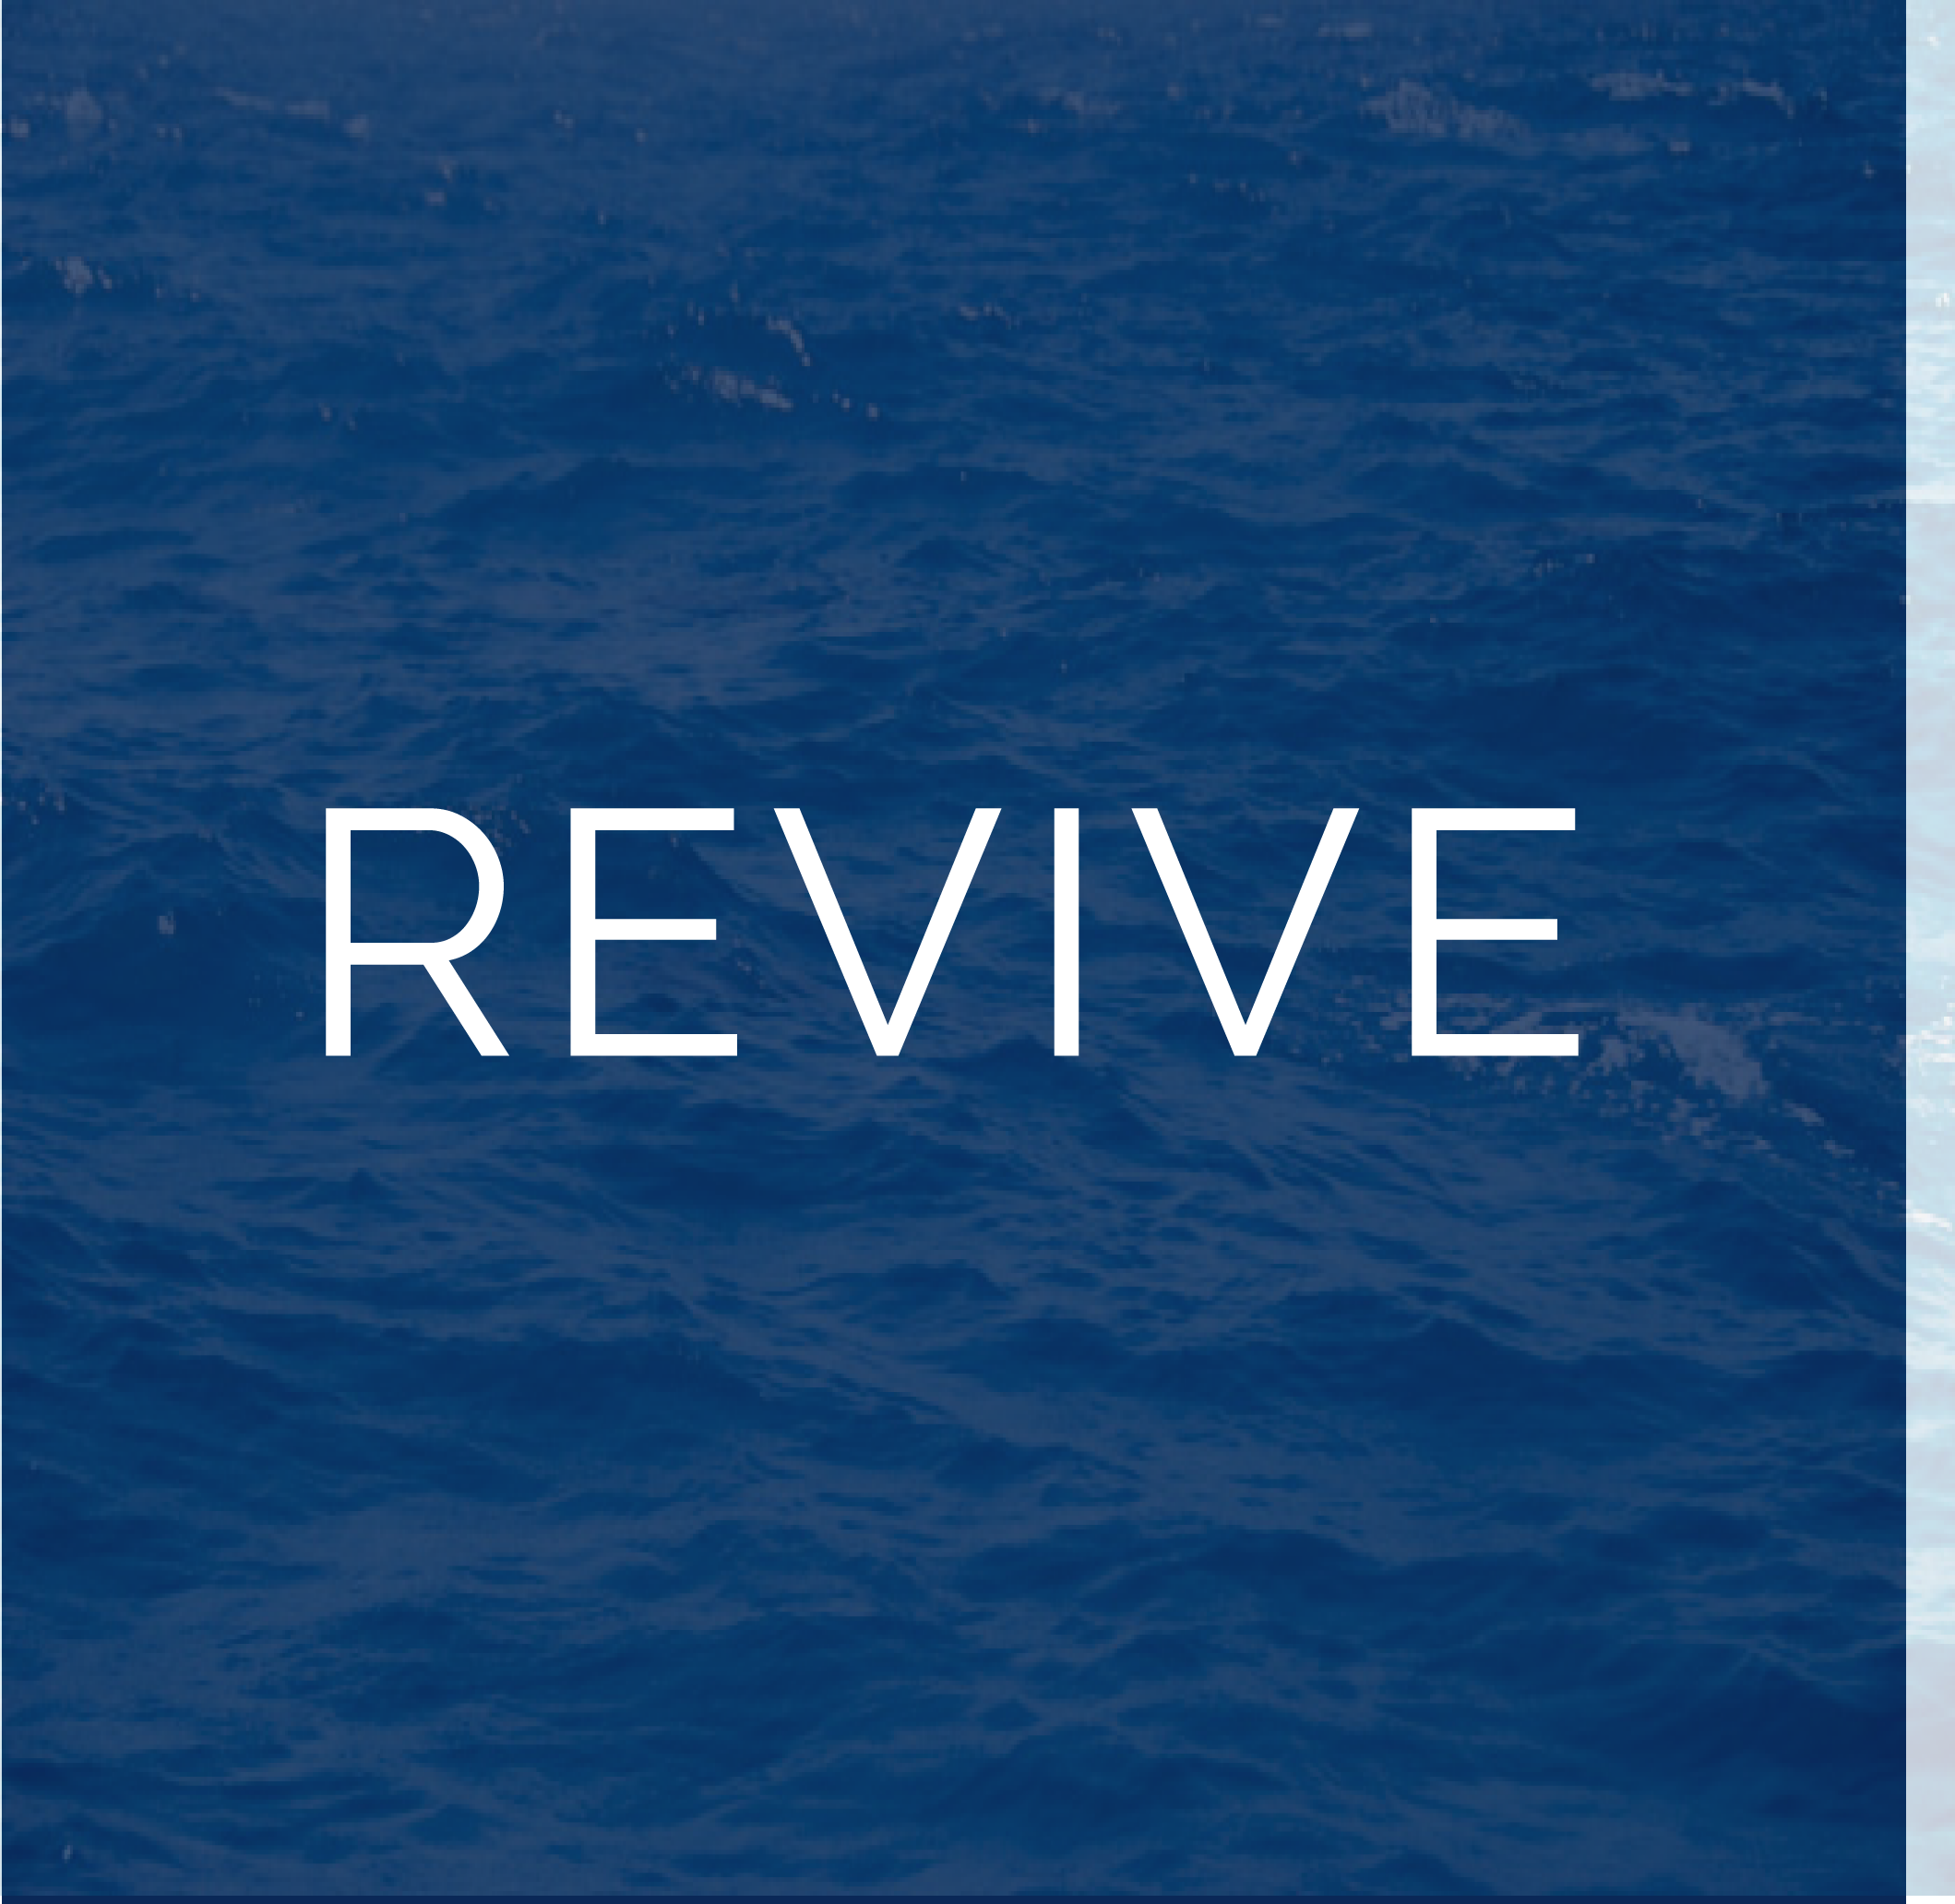 An icon representing Revive